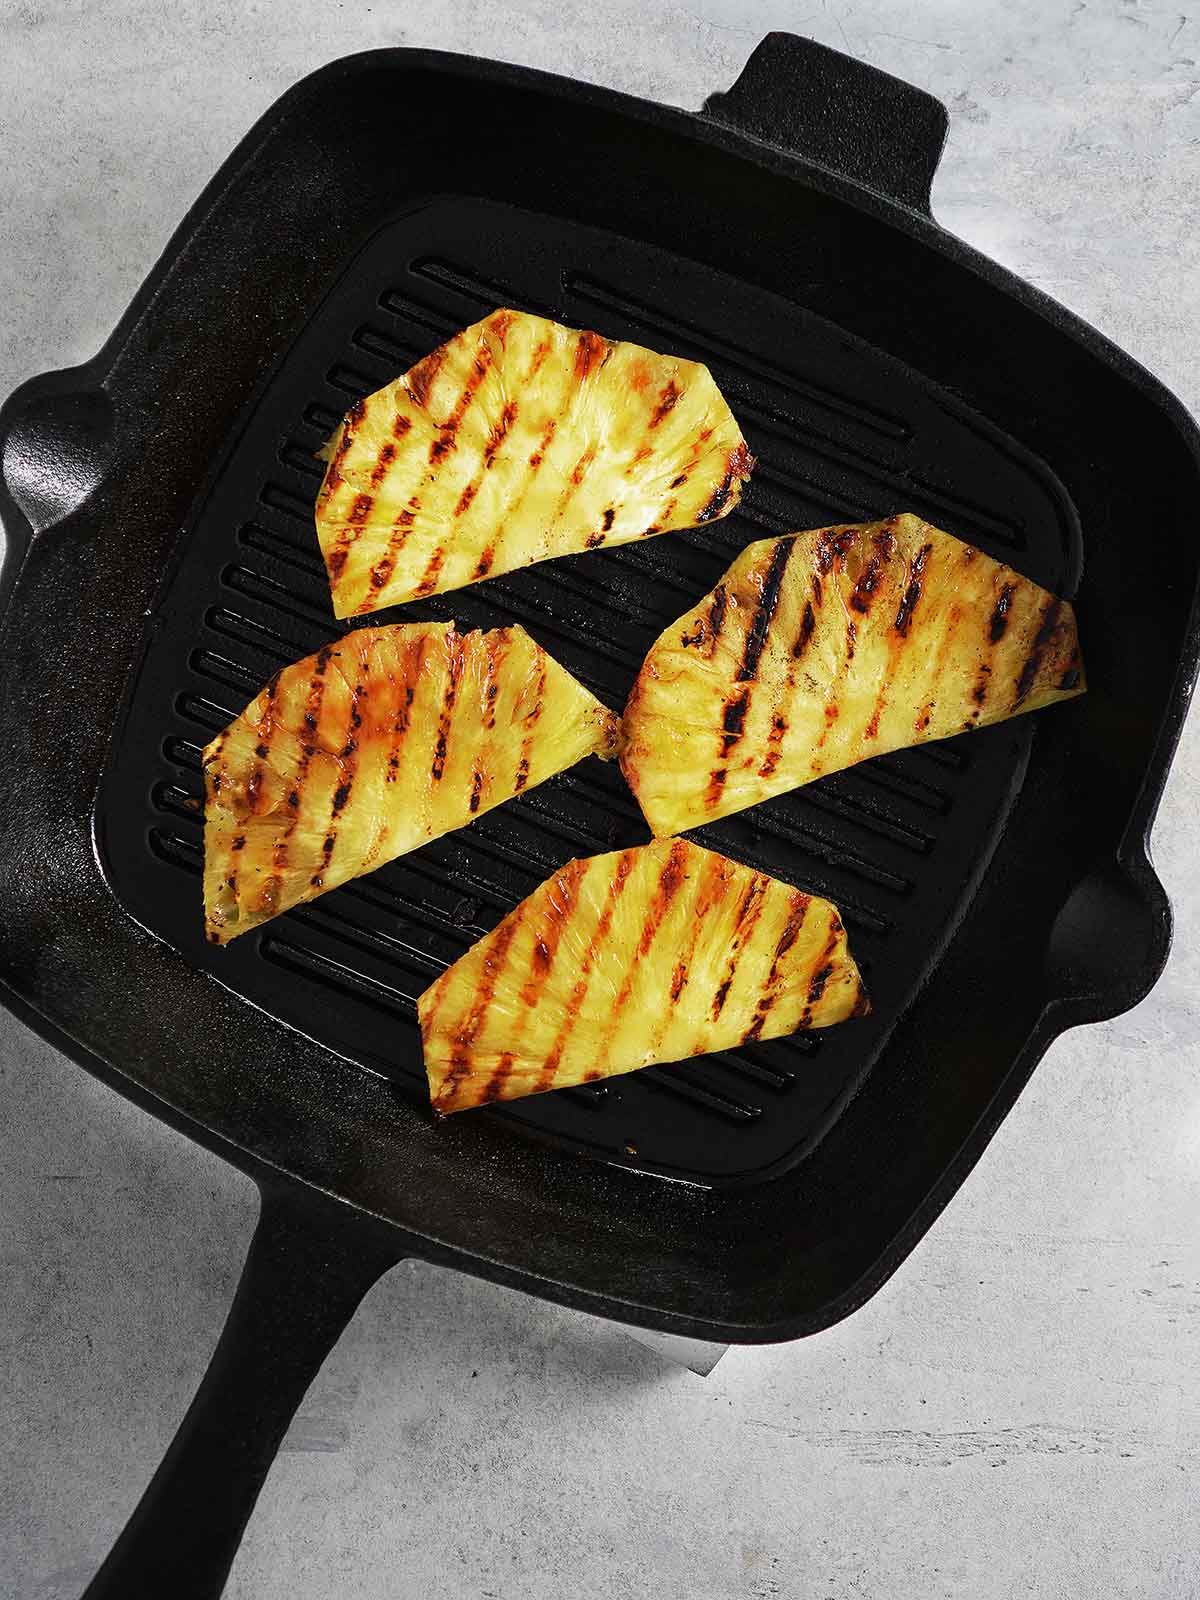 Slices of pineapple being grilled in a cast iron skillet.